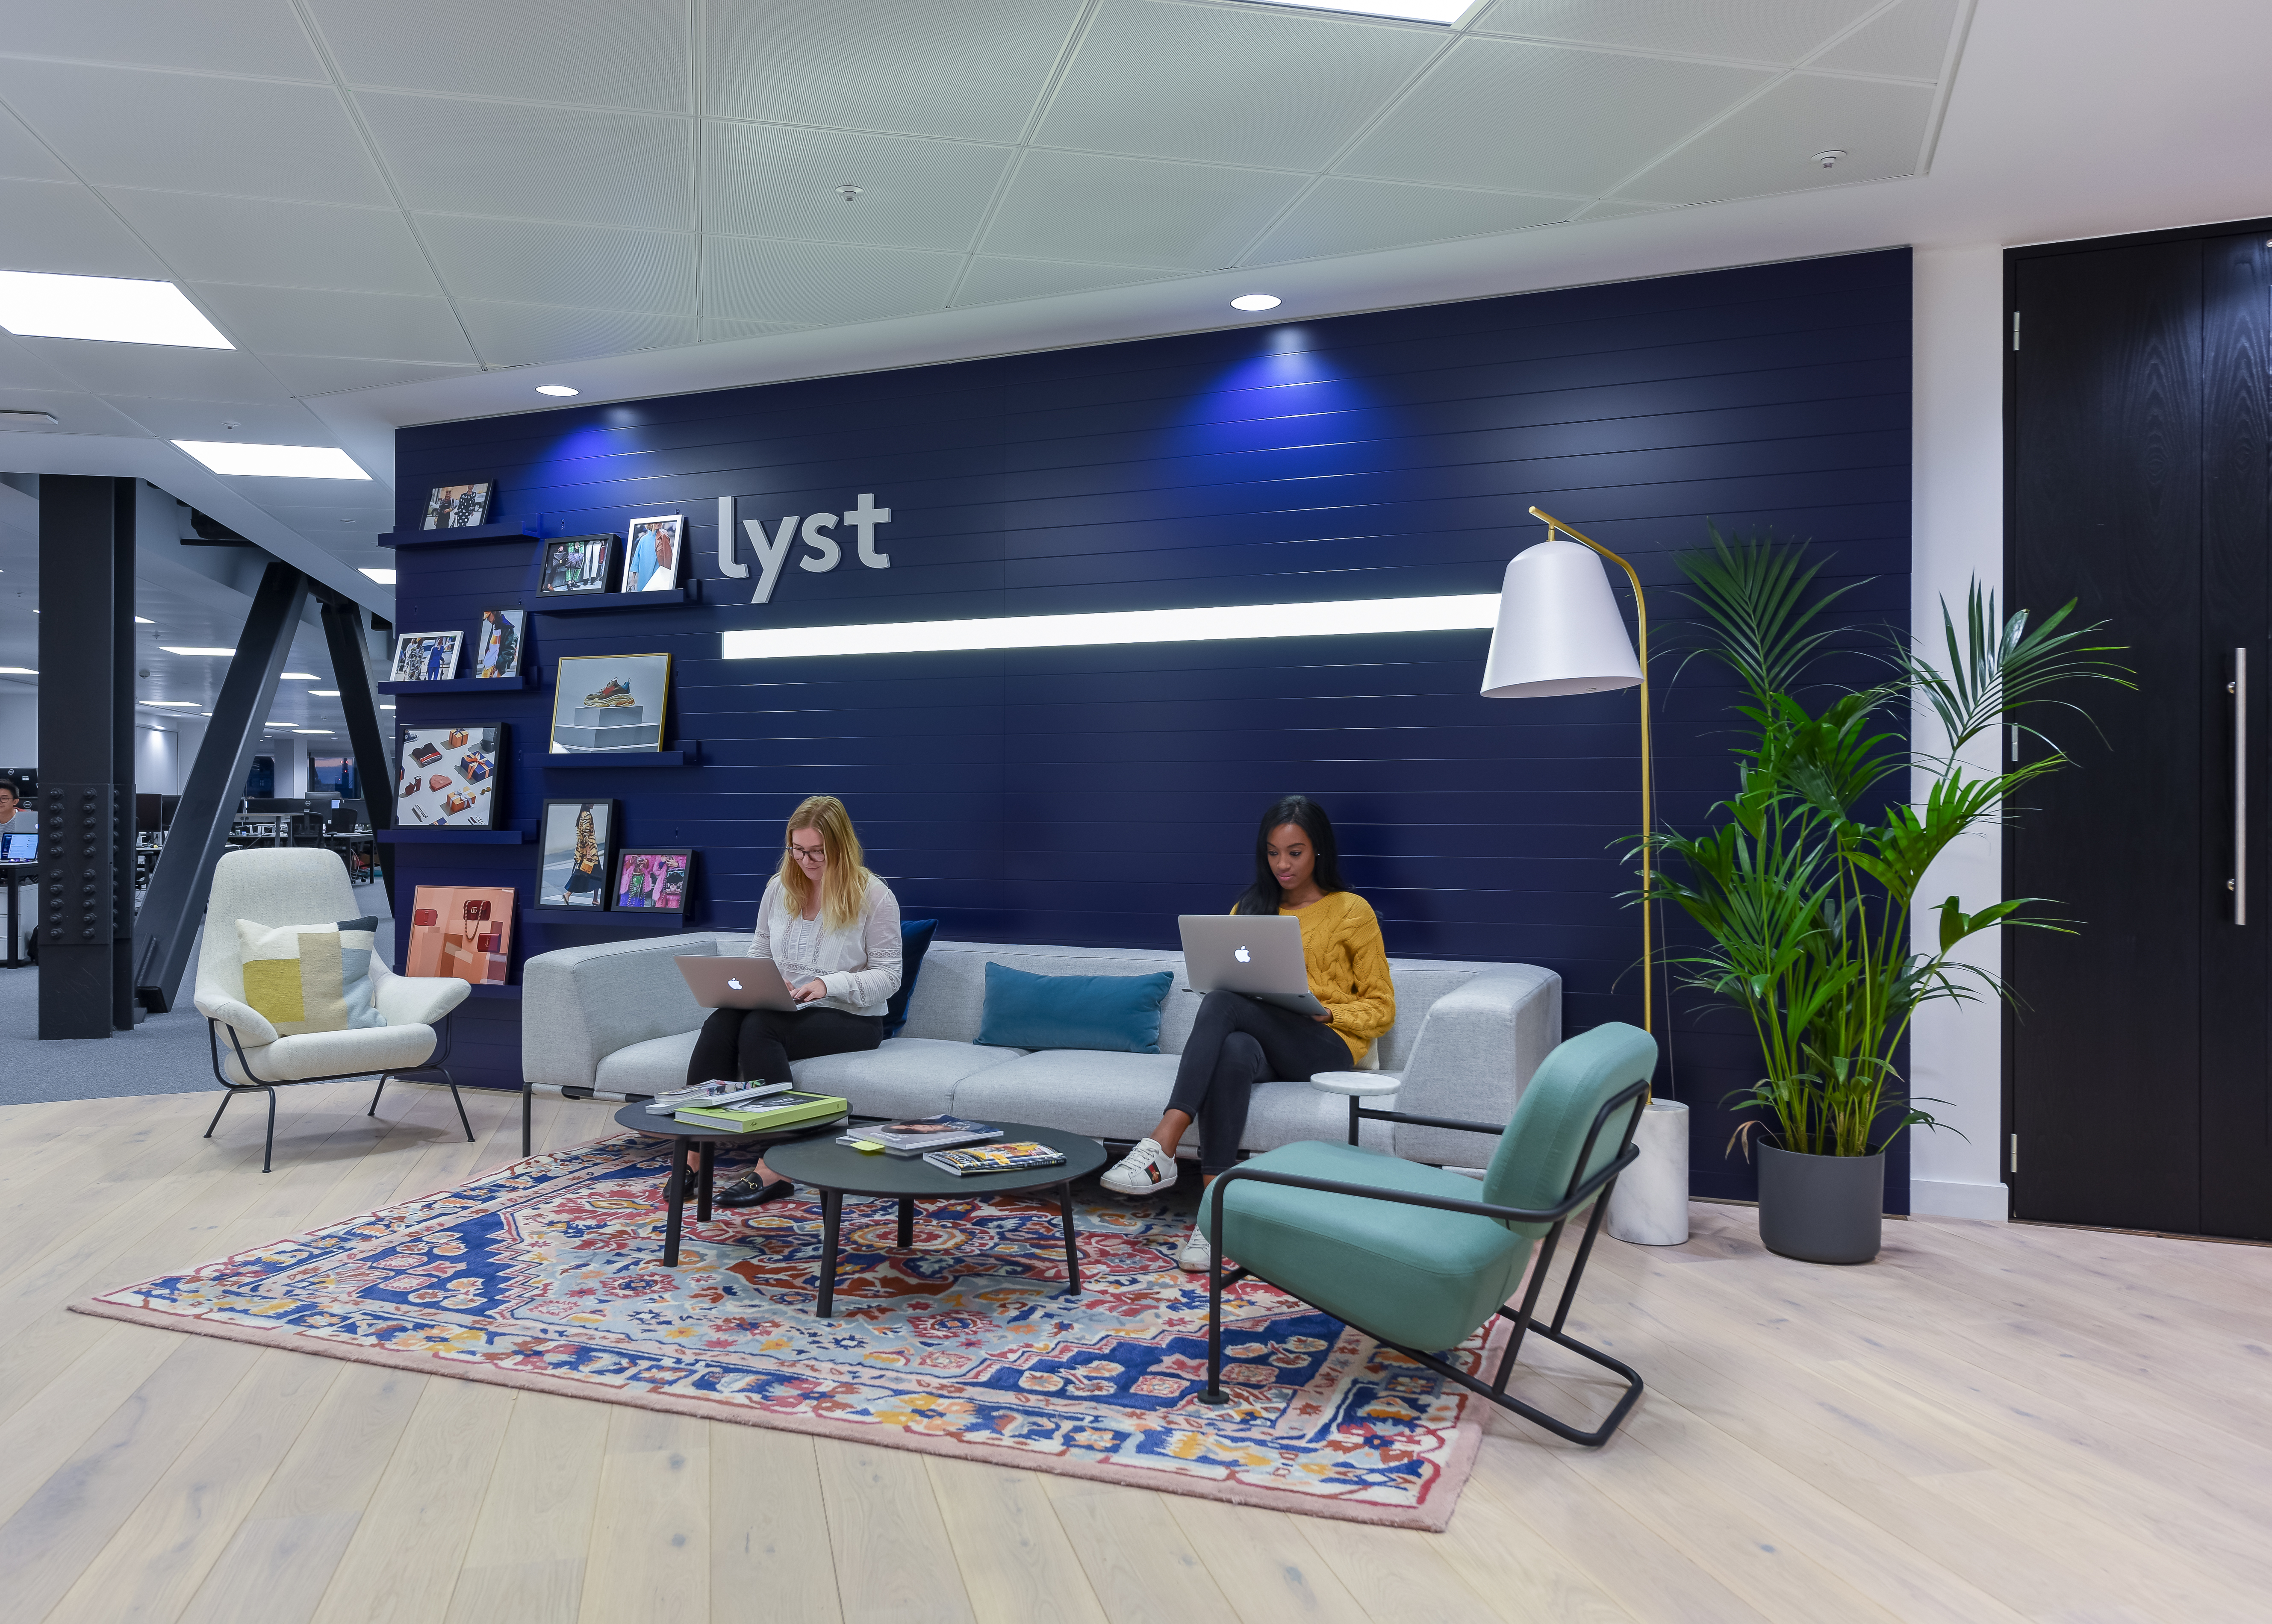 Lyst Offices 2019-39